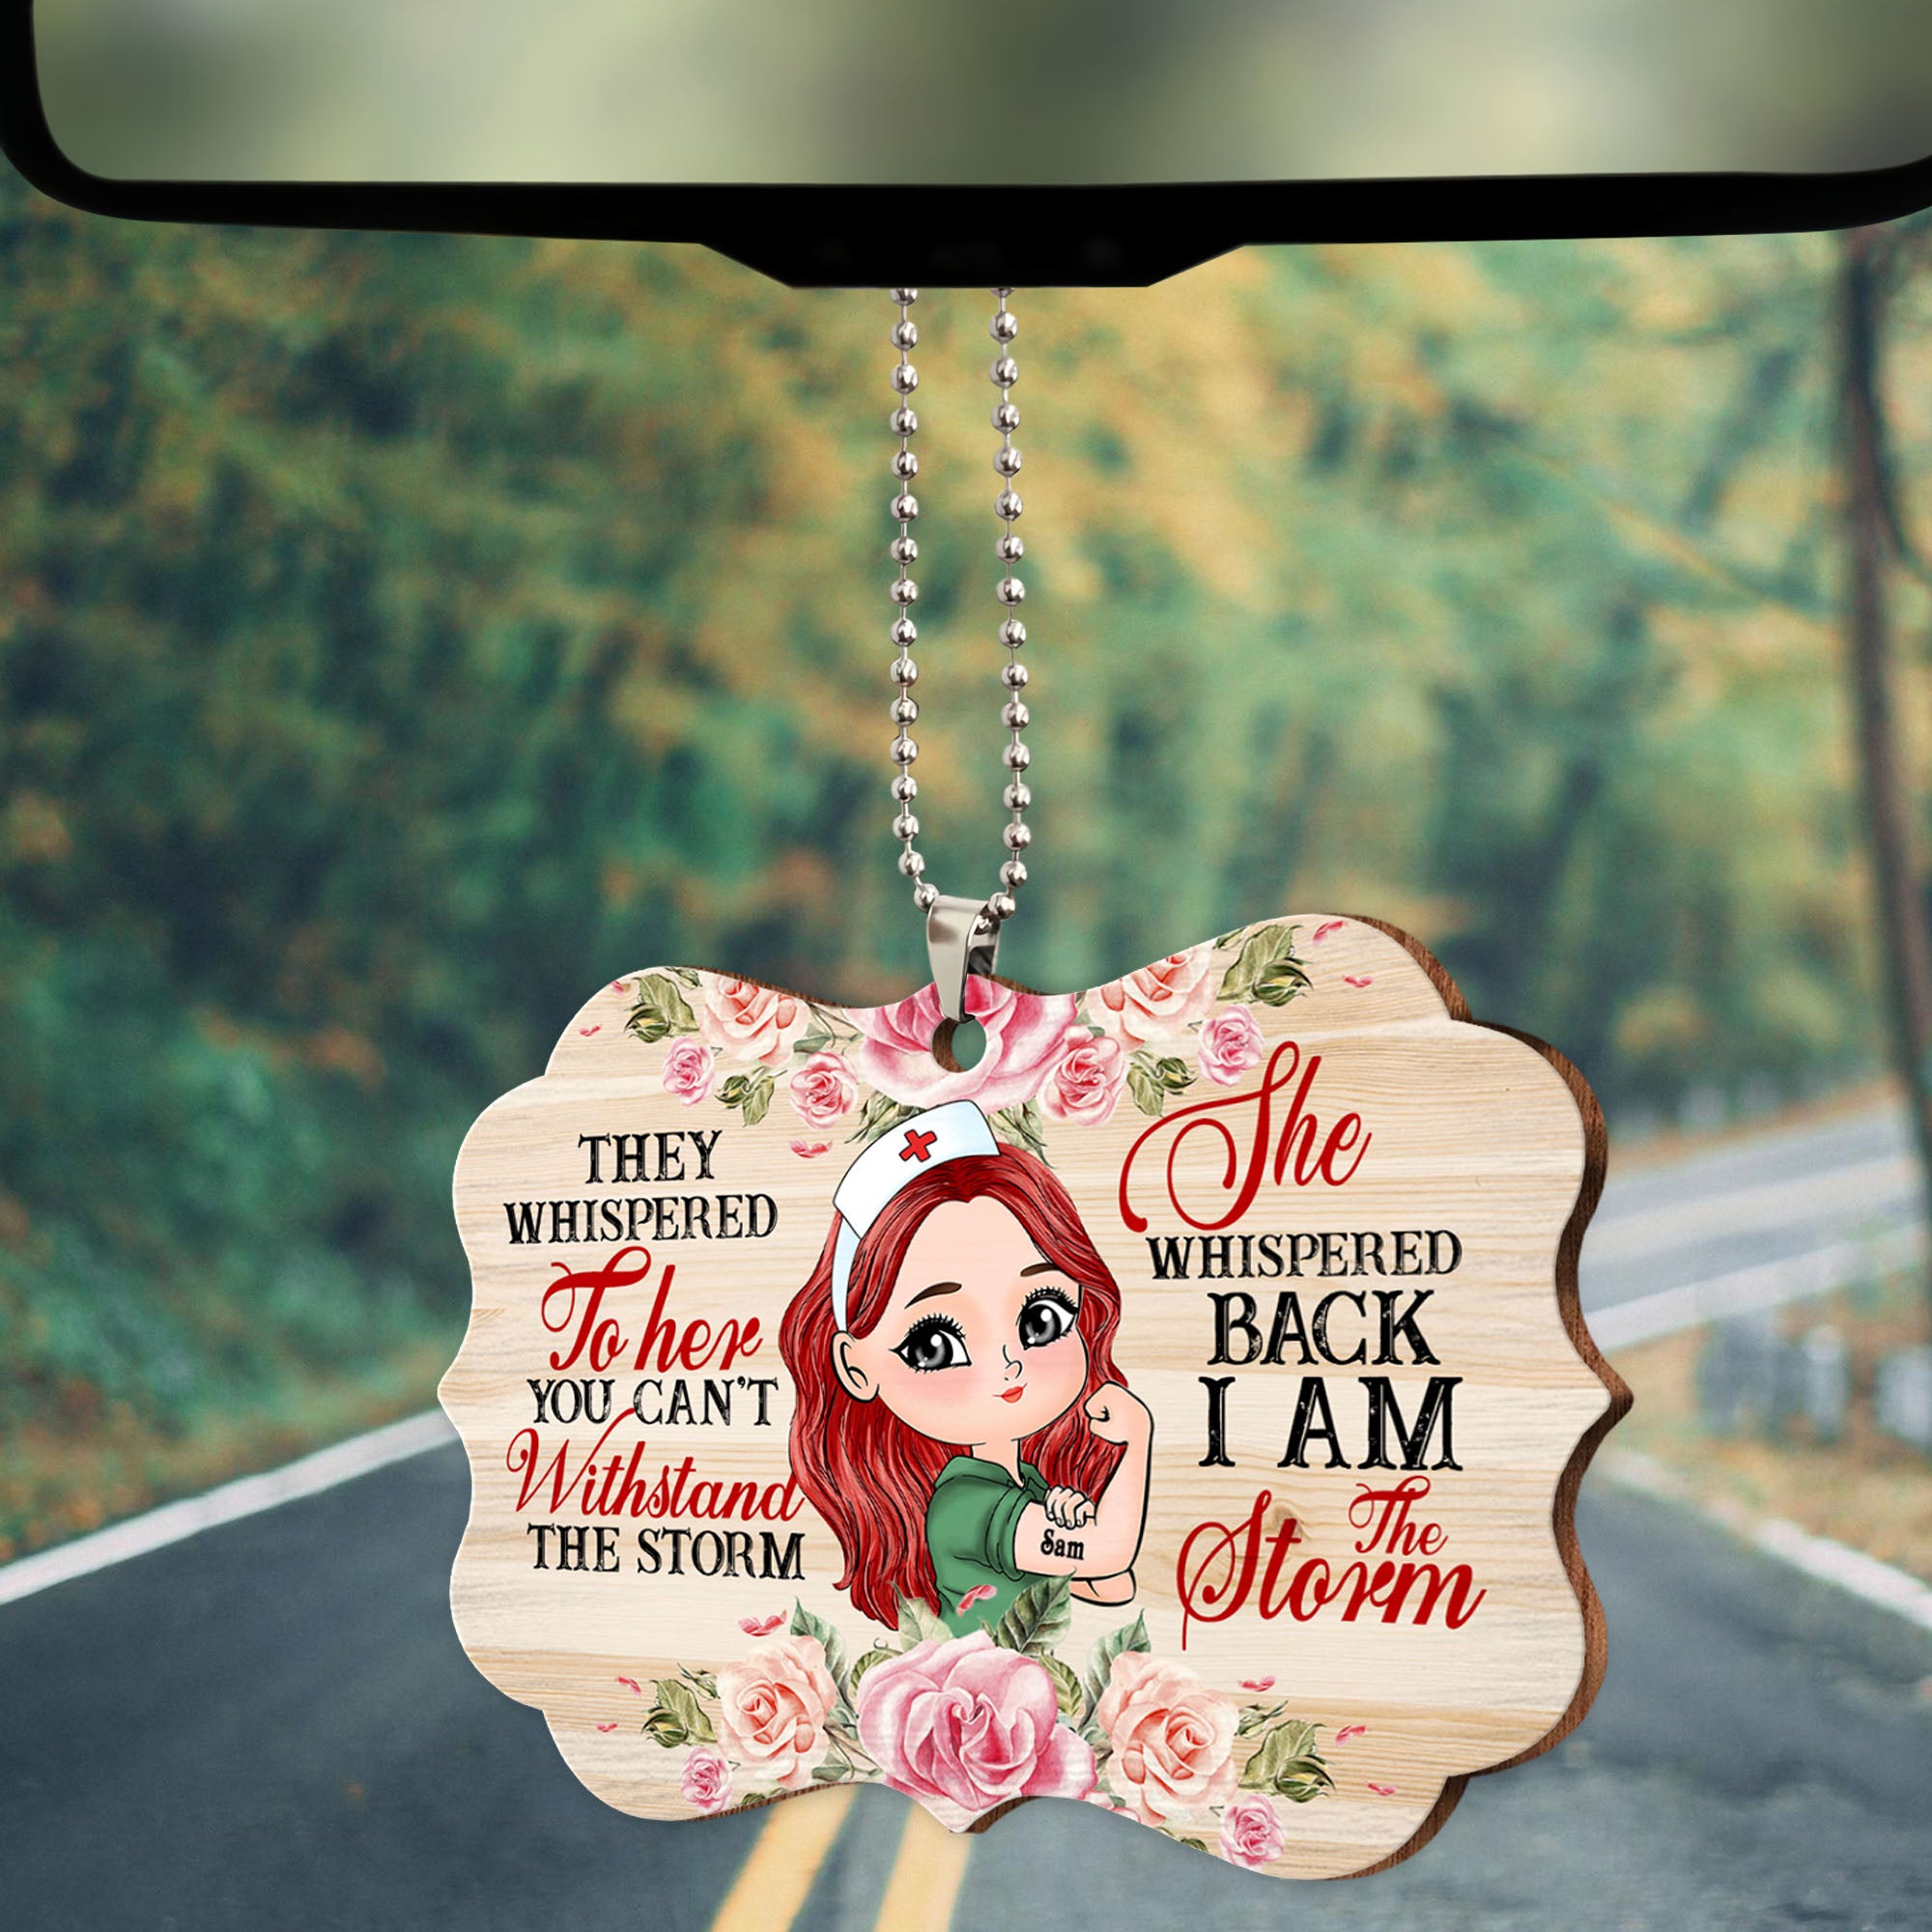 They Whispered To Her You Cannot Withstand The Storm She Whispered Back I Am The Storm - Personalized Wooden Ornament - Gift For Nurse